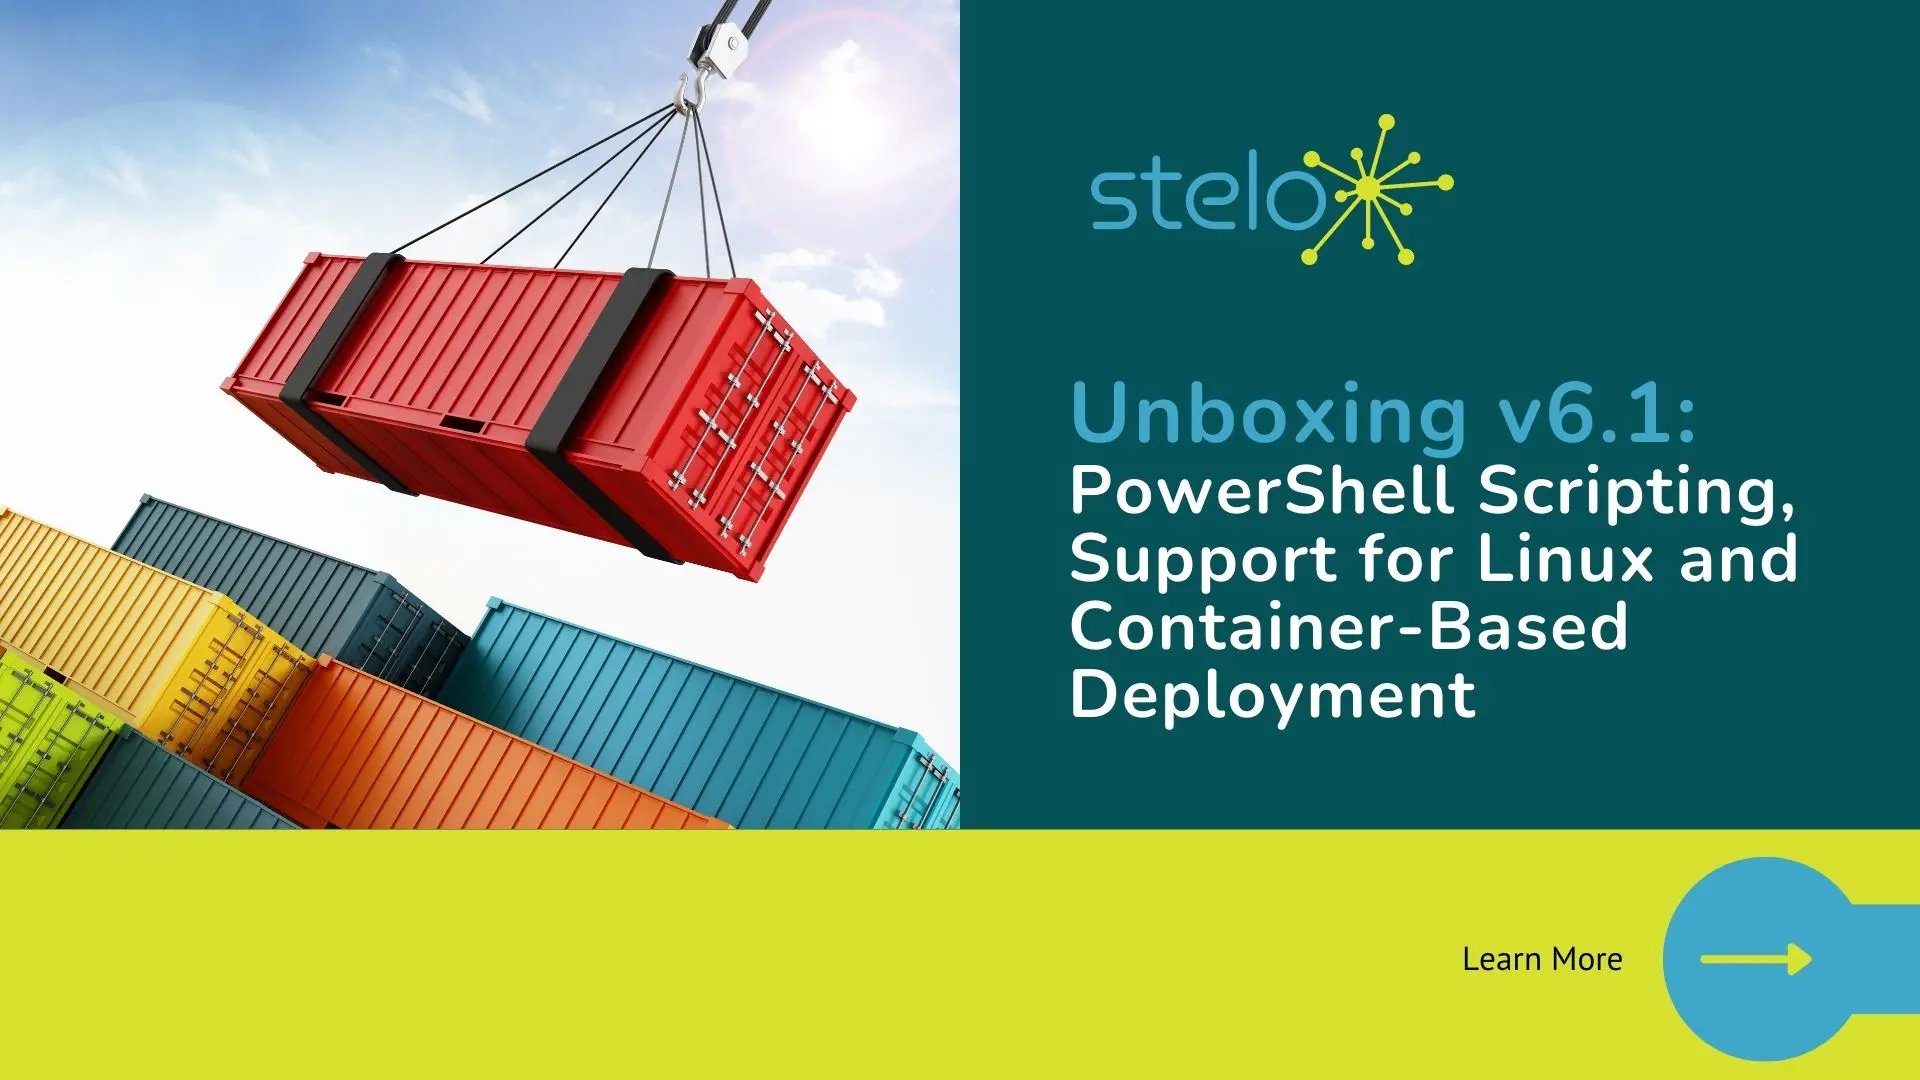 BLOG_PowerShell Scripting, Support for Linux and Container-Based Deployment_Social